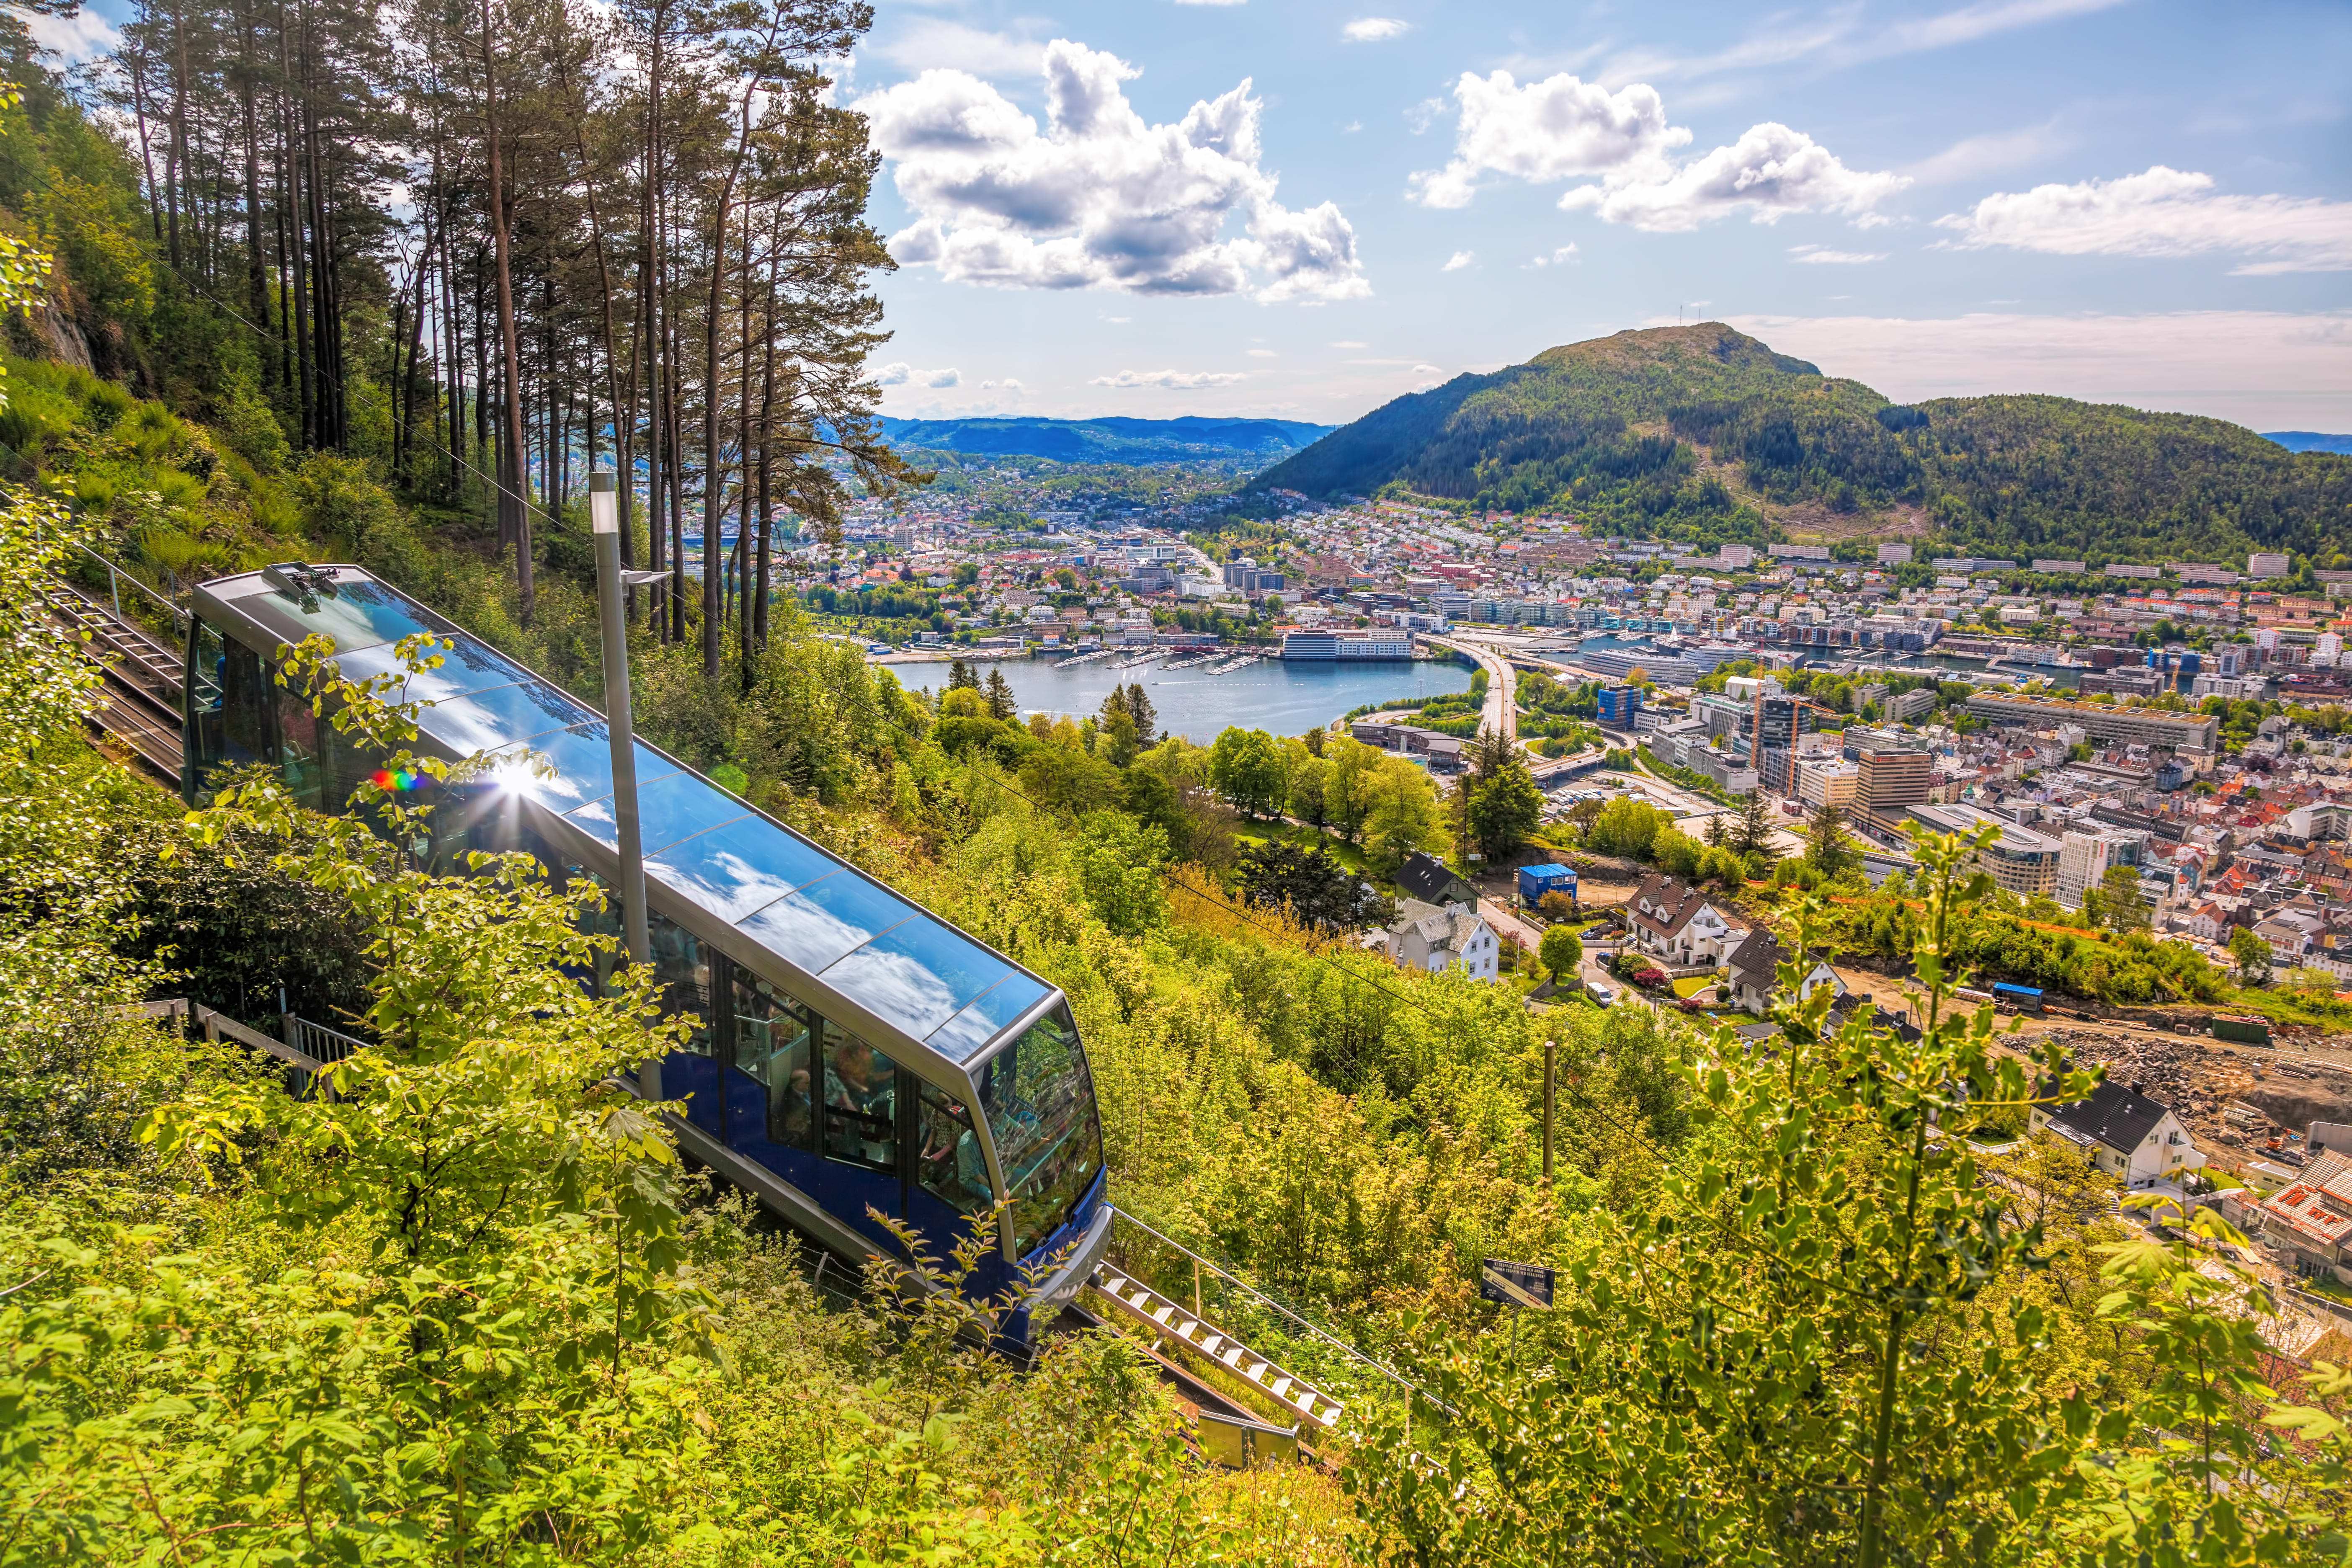 Things to Do in Bergen